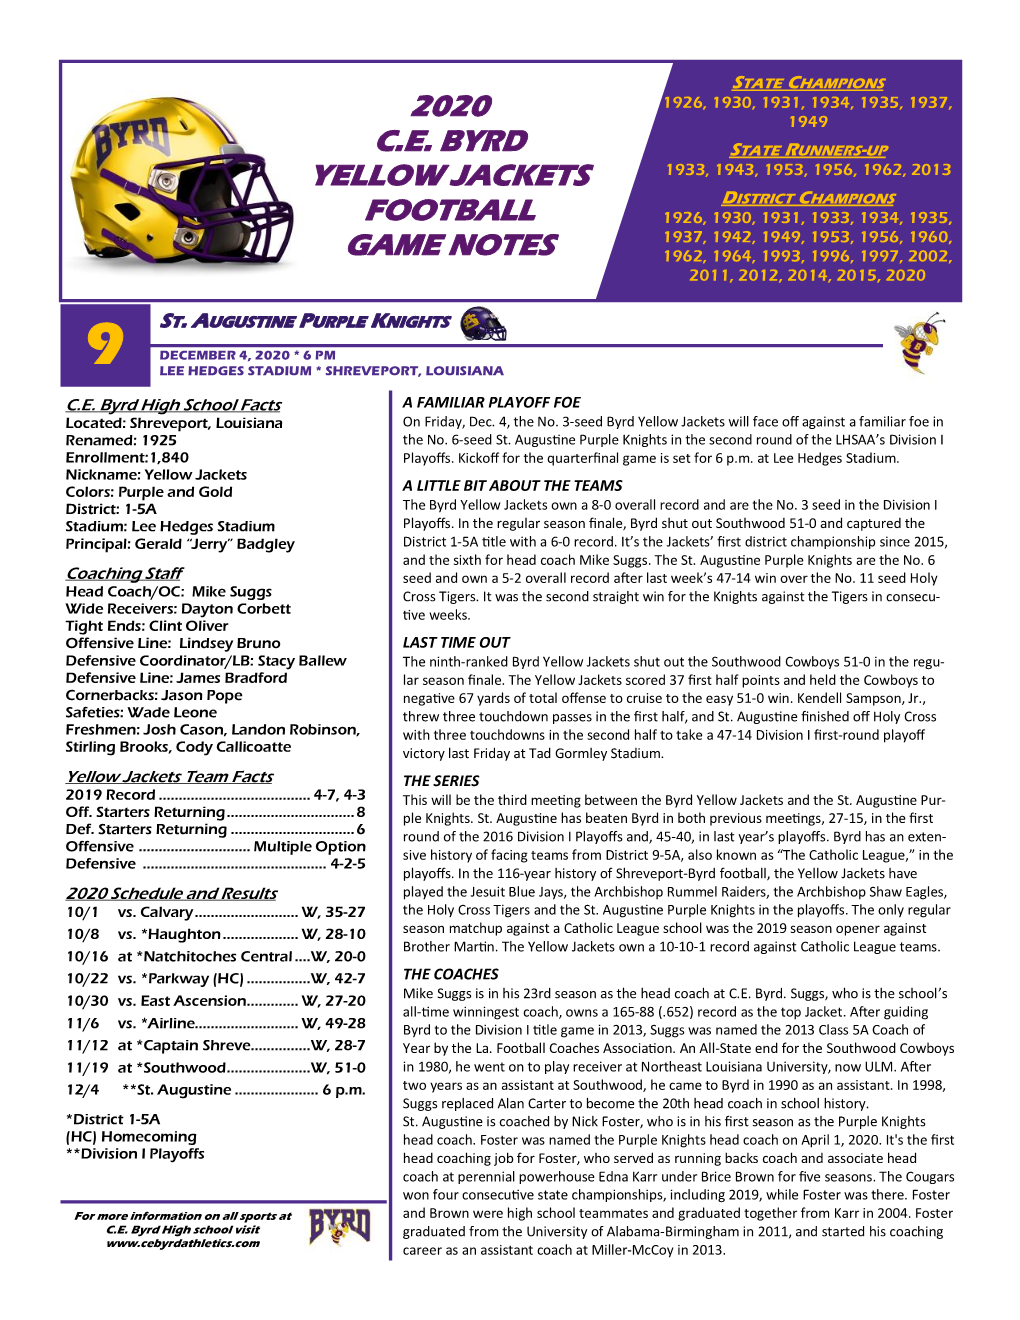 2020 C.E. Byrd Yellow Jackets Football Game Notes